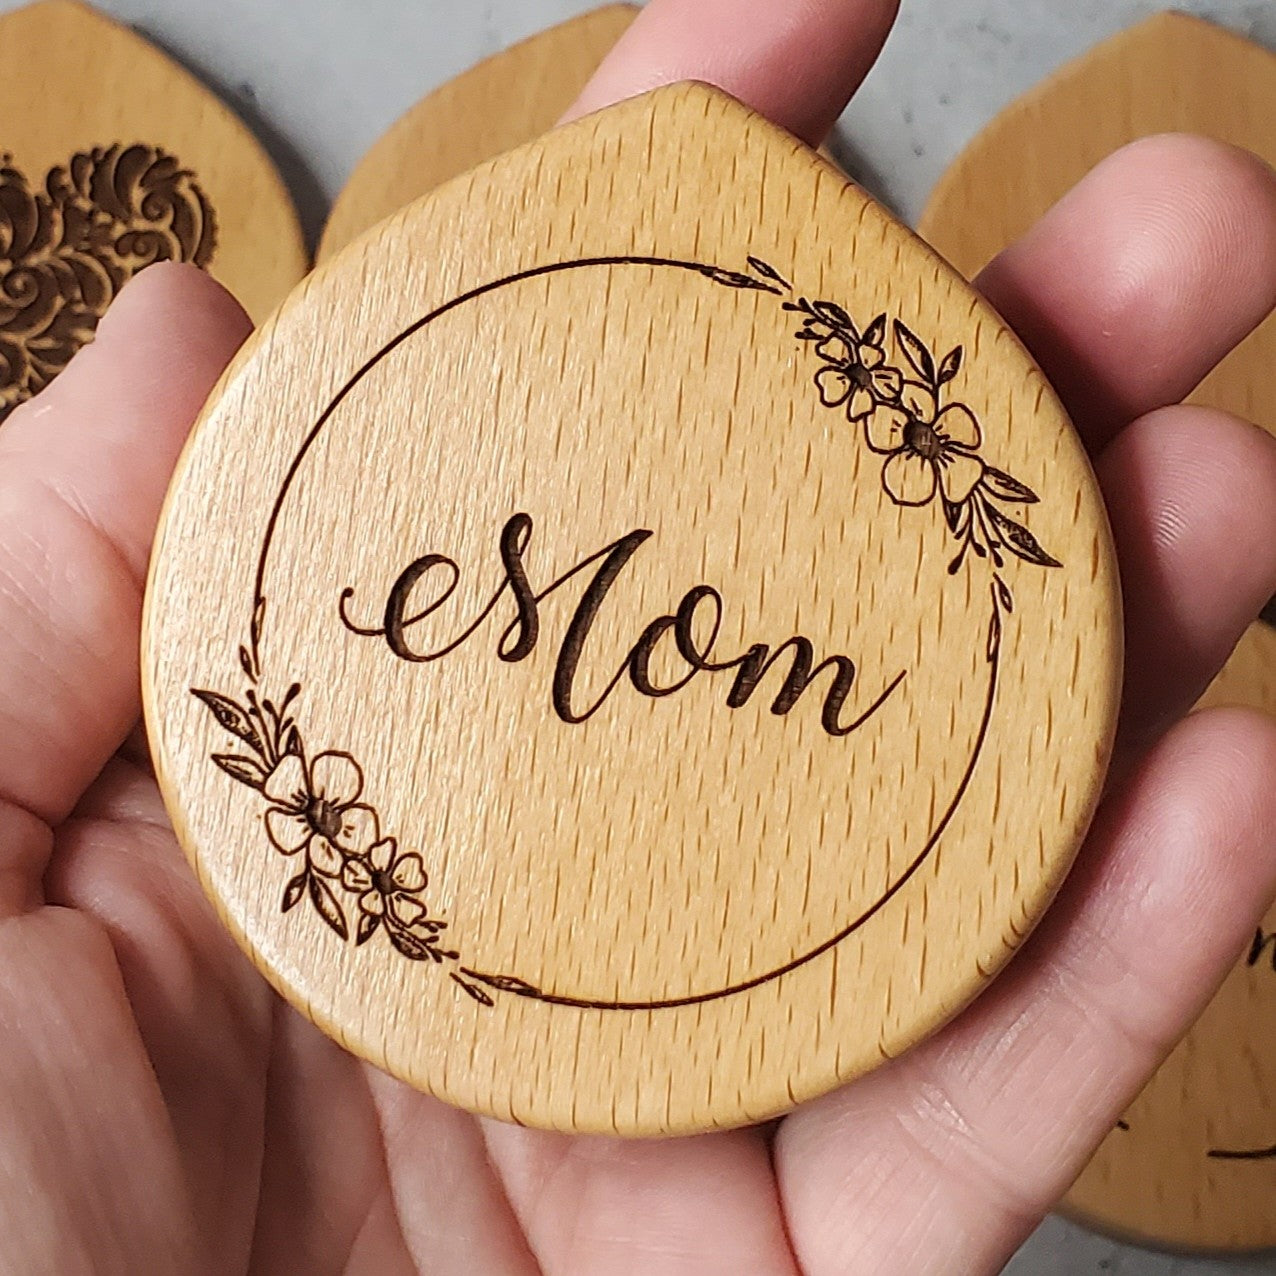 Best Mom gift, compact mirror with Mom engraved on top